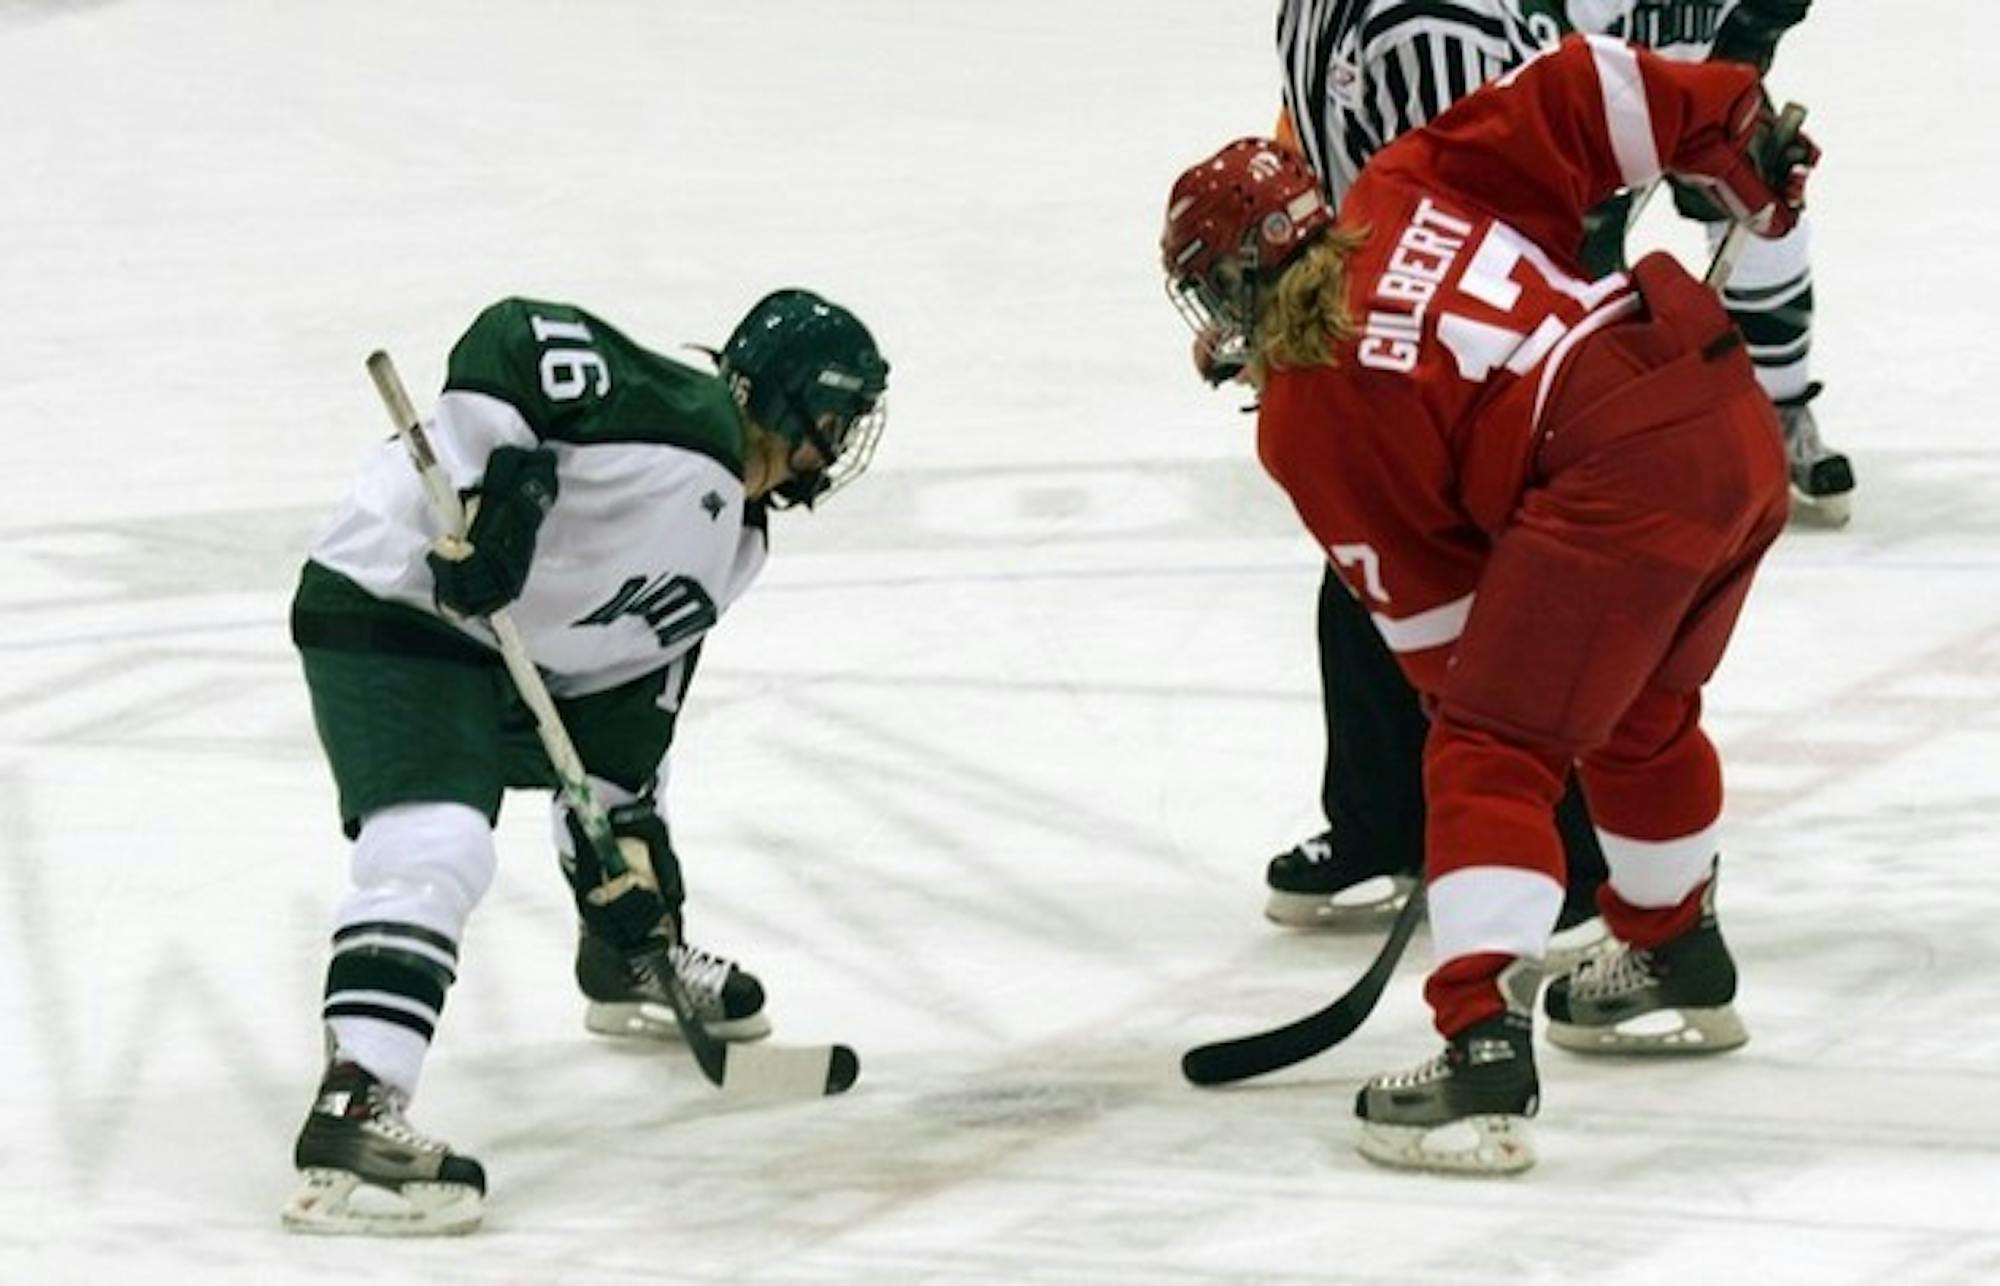 After trouncing Cornell by six goals on Friday, Dartmouth suffered its first loss to Colgate the following day.